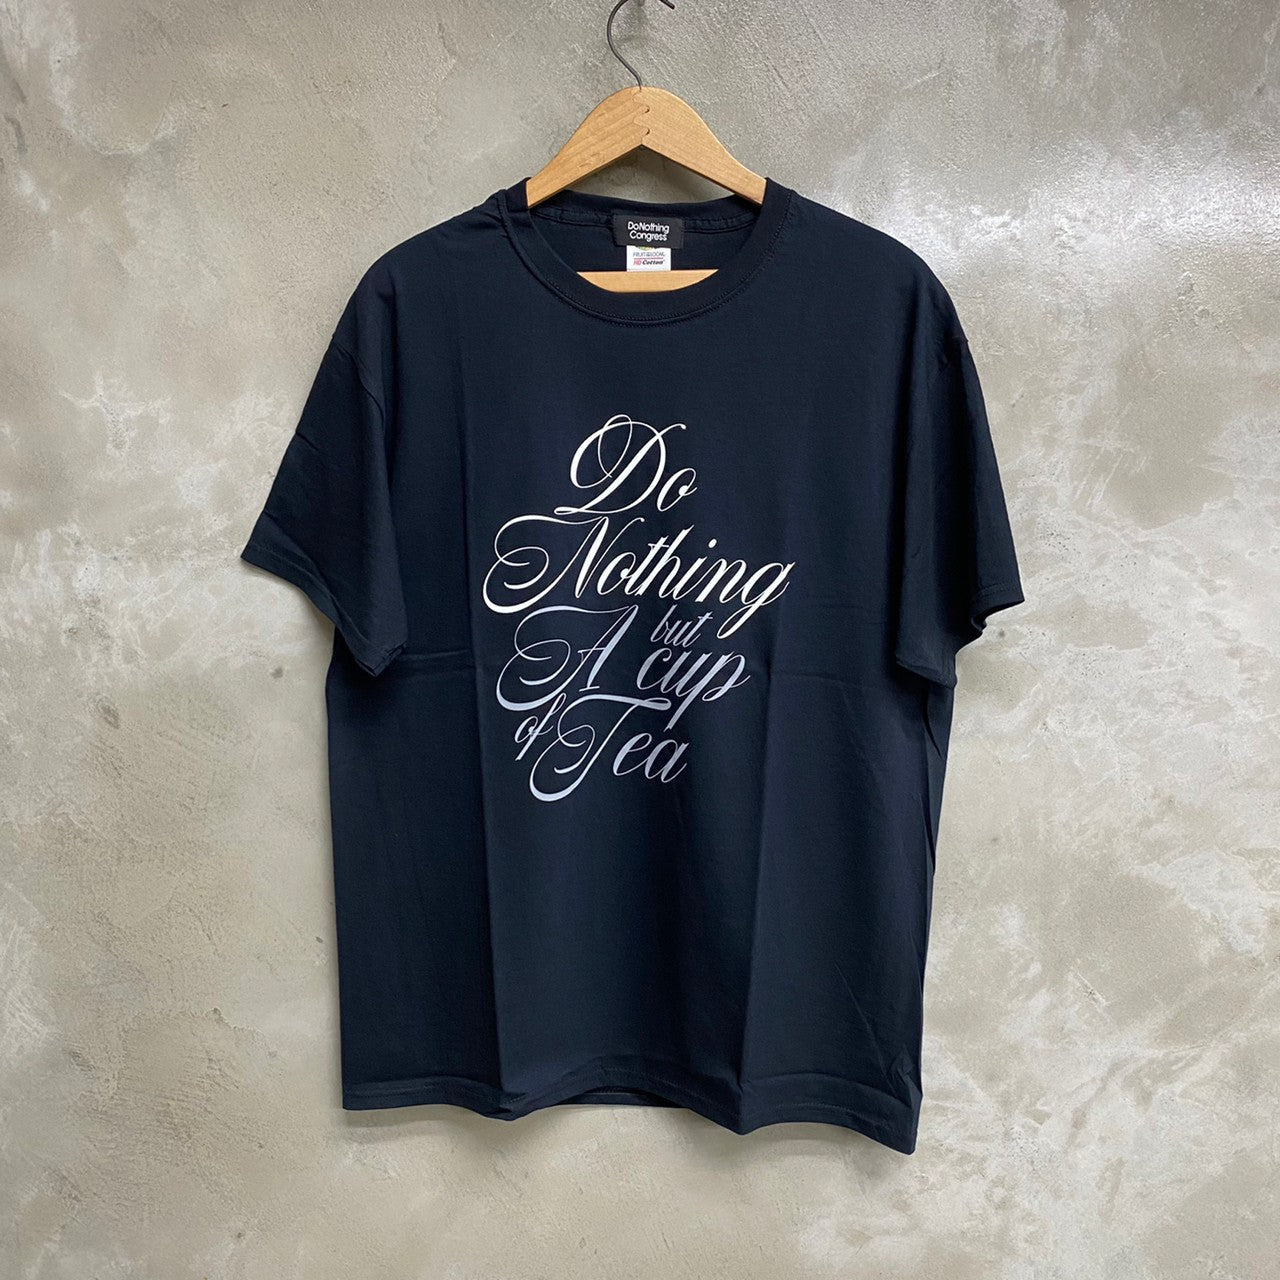 do nothing congress Tシャツ黒 L